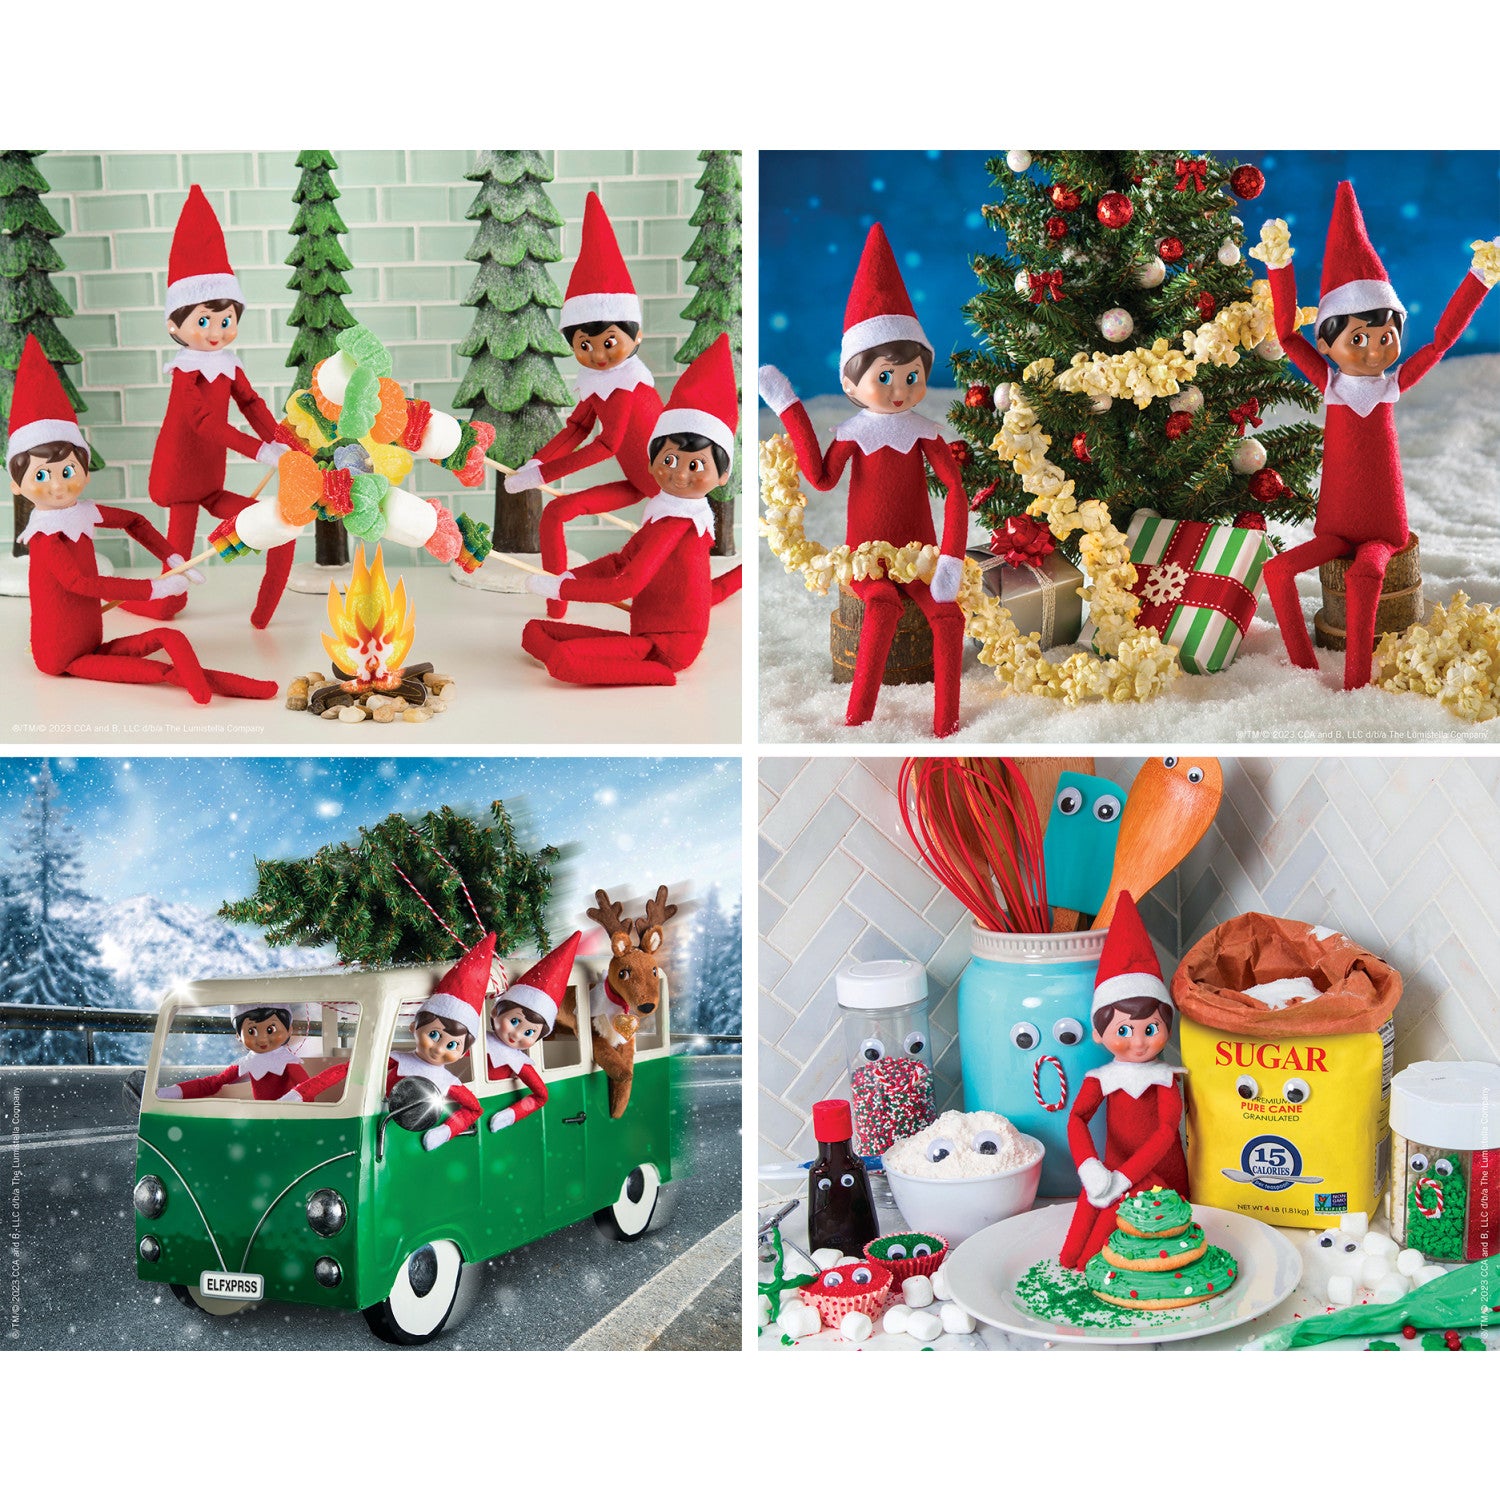 Elf on the Shelf - 4 Pack V2 100 Piece Puzzles